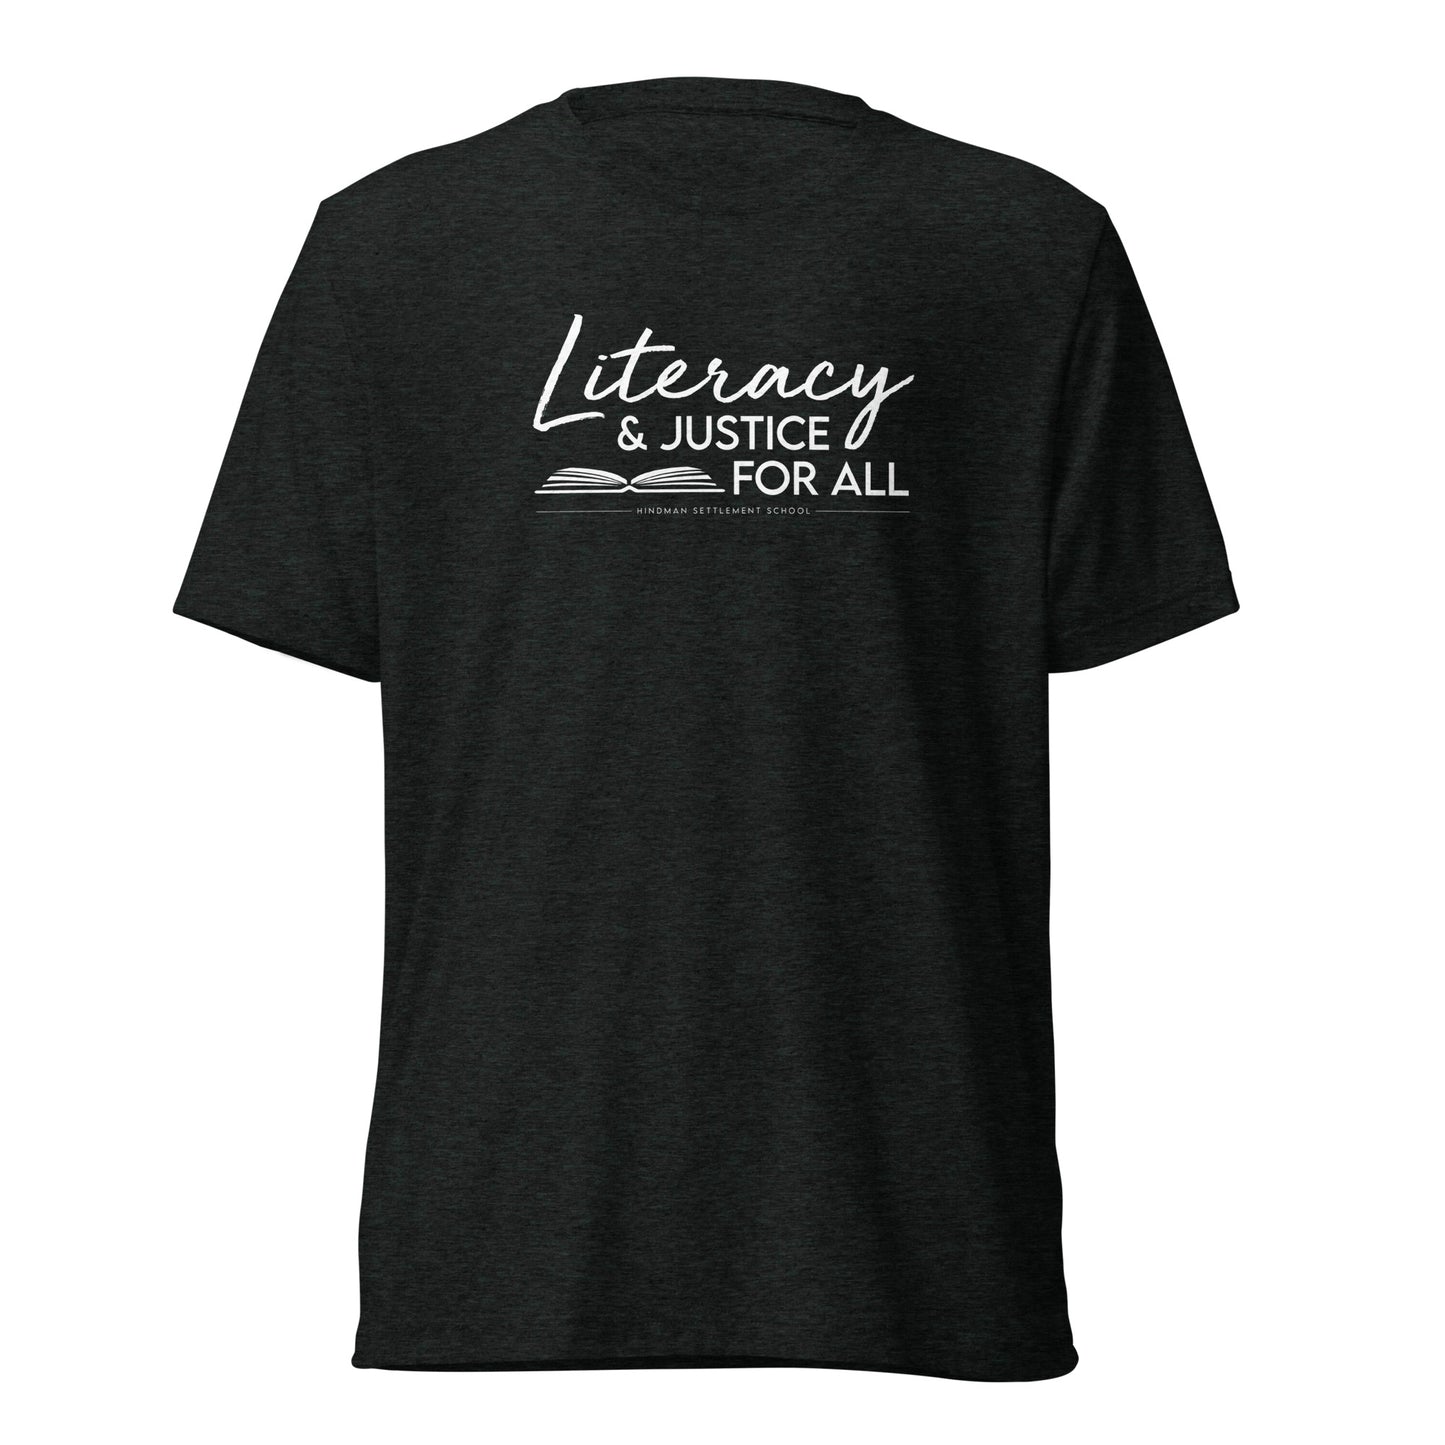 "Literacy & Justice For All" T-Shirt